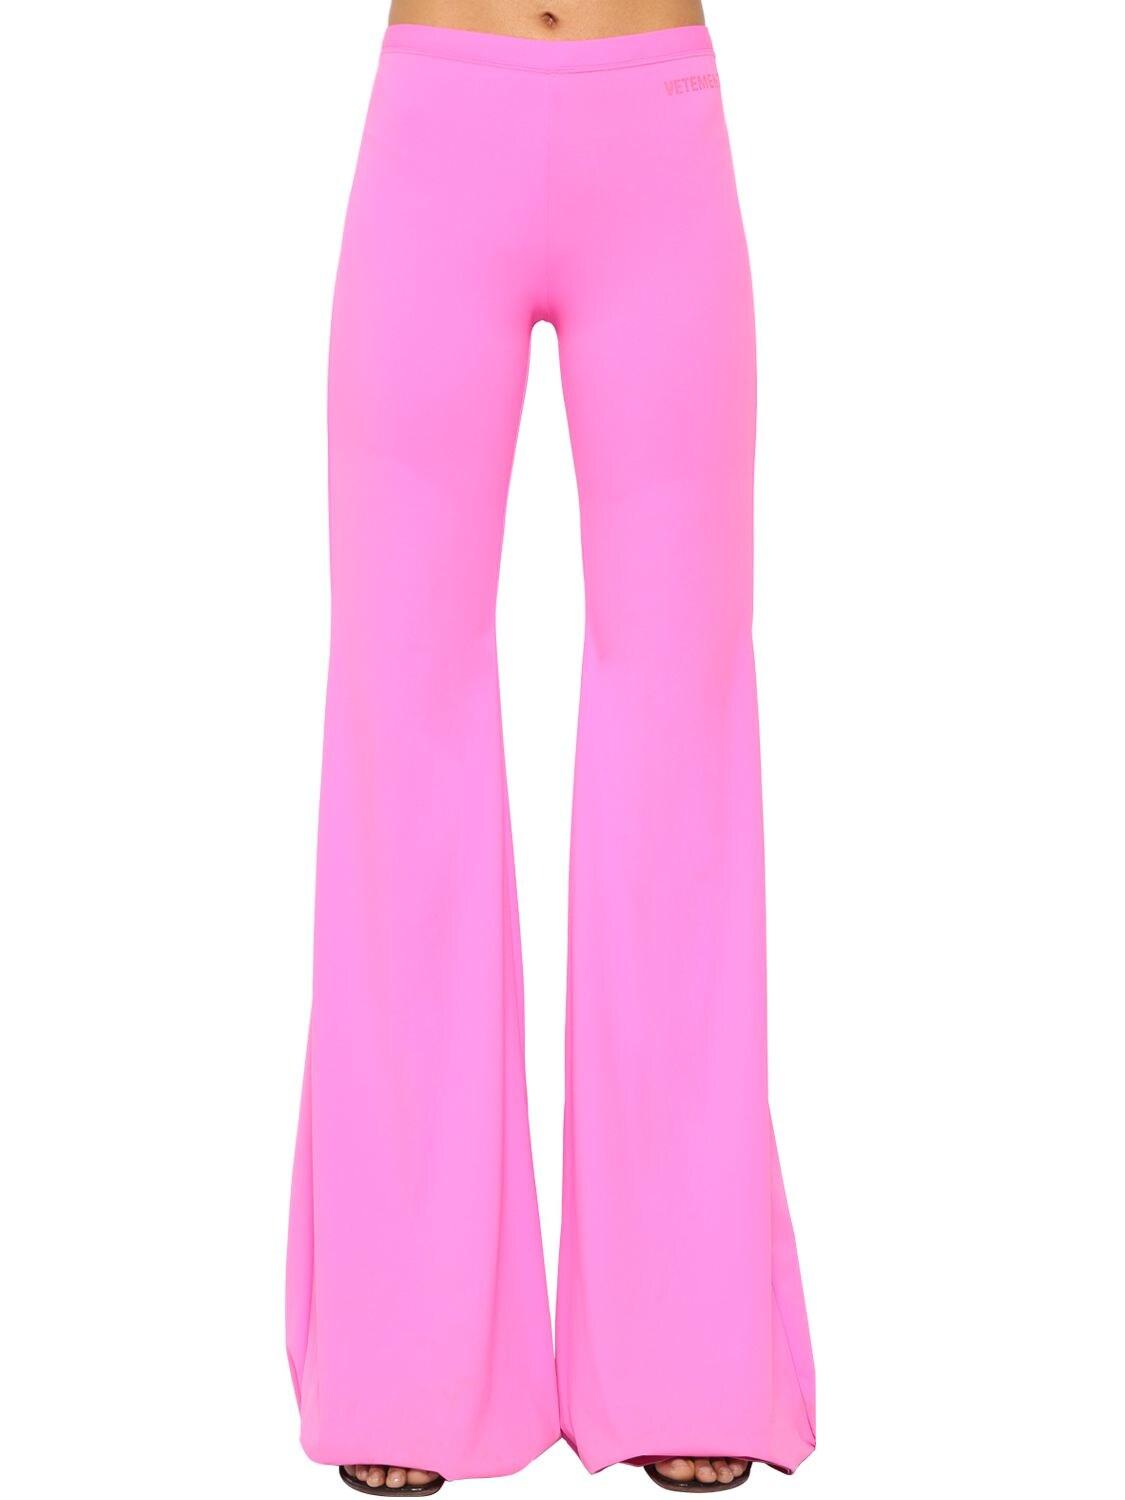 Vetements Synthetic Flared Lycra Pants in Hot Pink (Pink) - Lyst